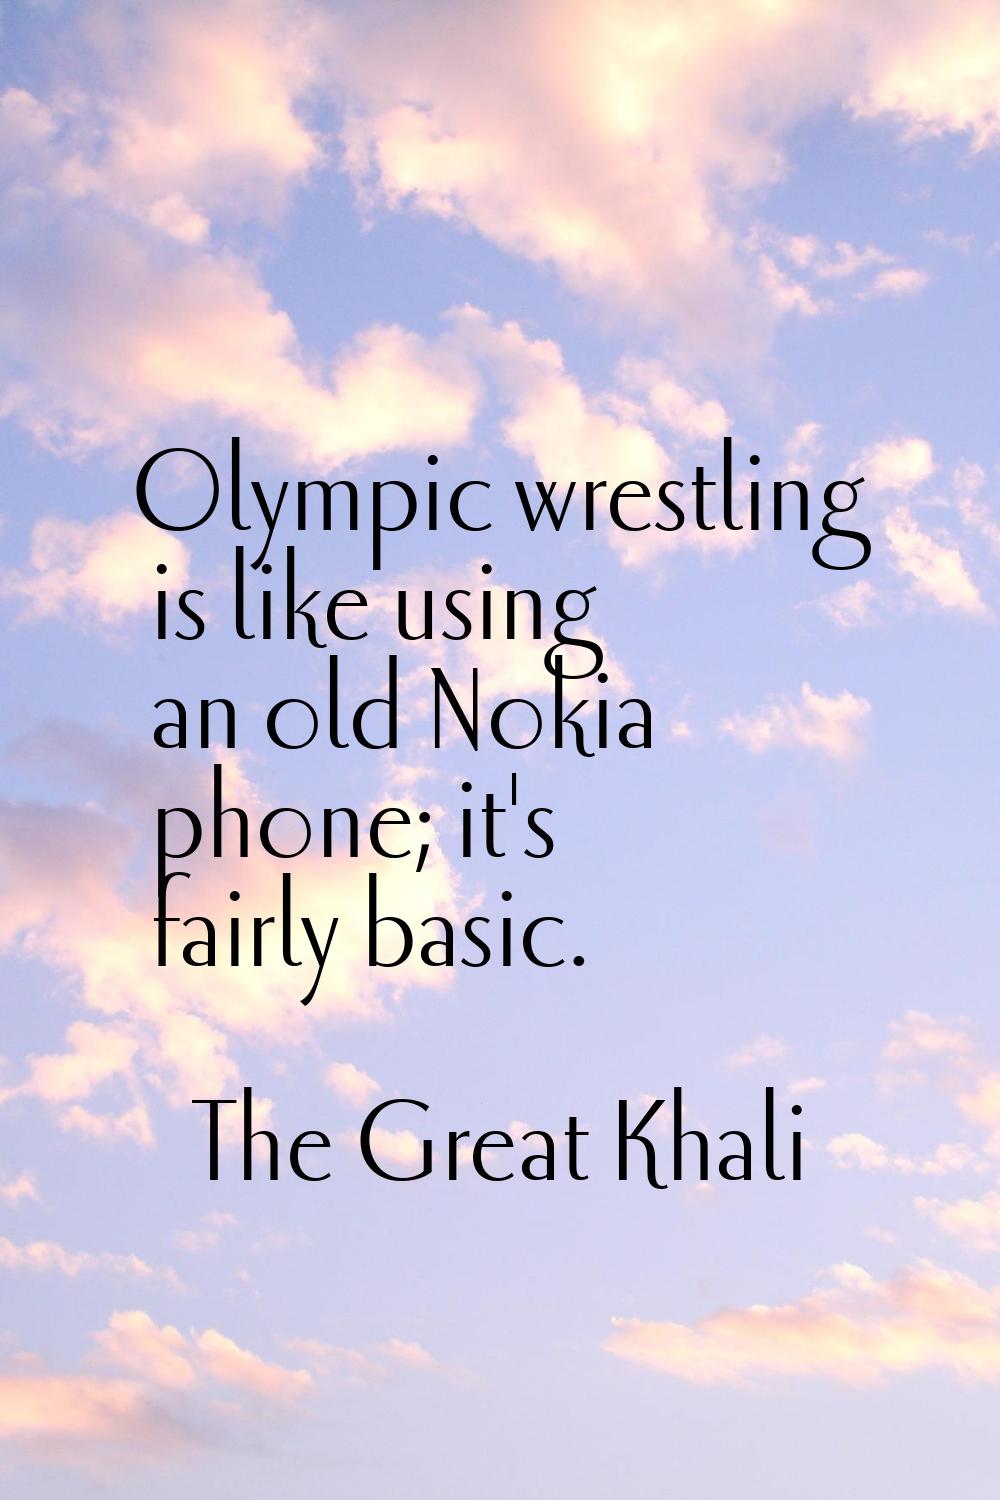 Olympic wrestling is like using an old Nokia phone; it's fairly basic.